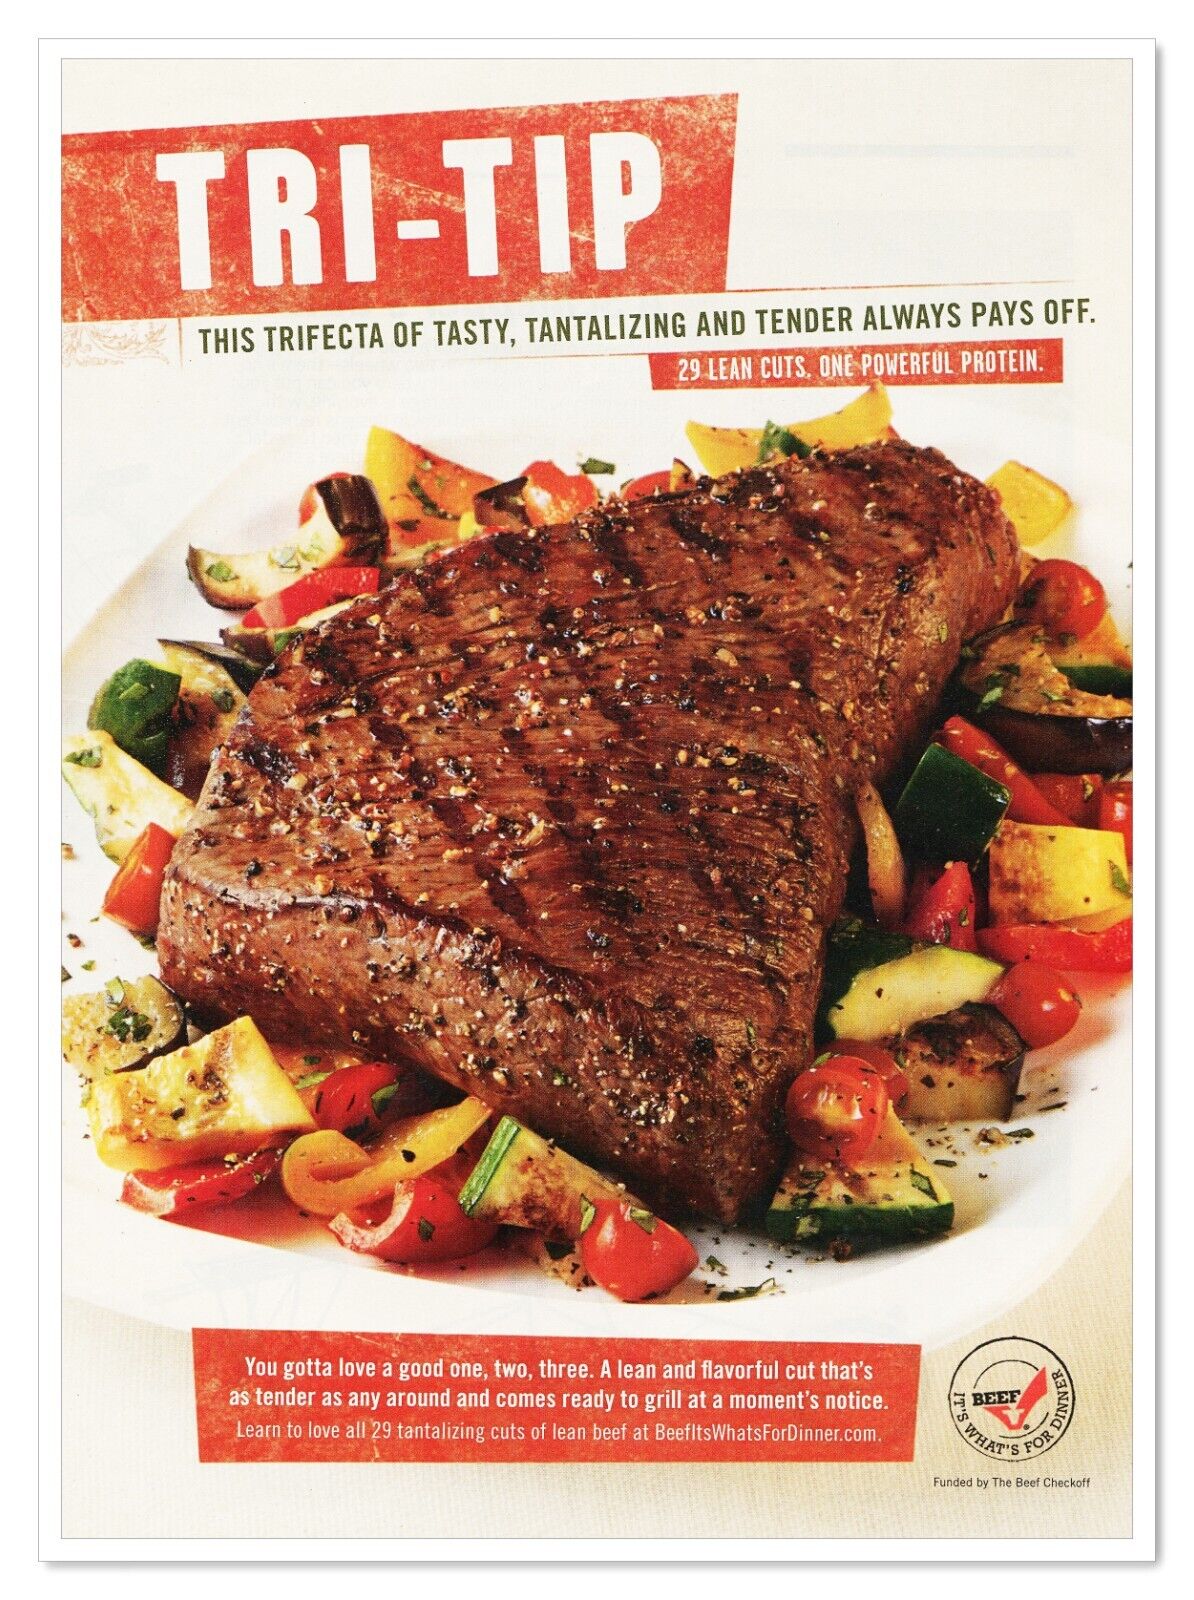 Beef It\'s What\'s For Dinner Tri-Tip Steak 2011 Full-Page Print Magazine Ad